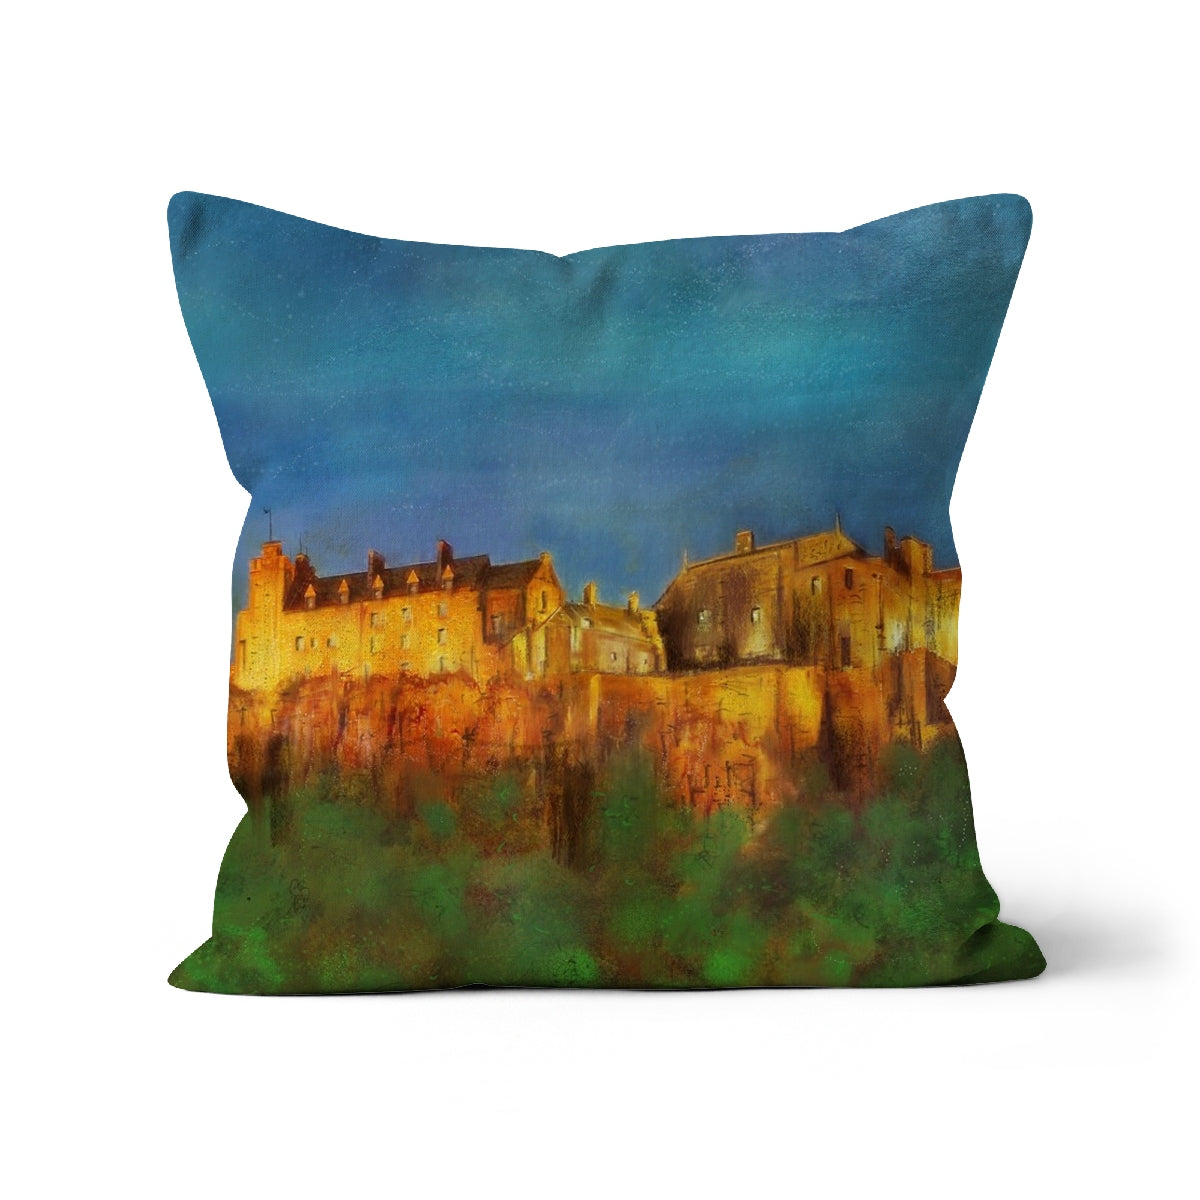 Stirling Castle Art Gifts Cushion-Cushions-Historic & Iconic Scotland Art Gallery-Canvas-12"x12"-Paintings, Prints, Homeware, Art Gifts From Scotland By Scottish Artist Kevin Hunter